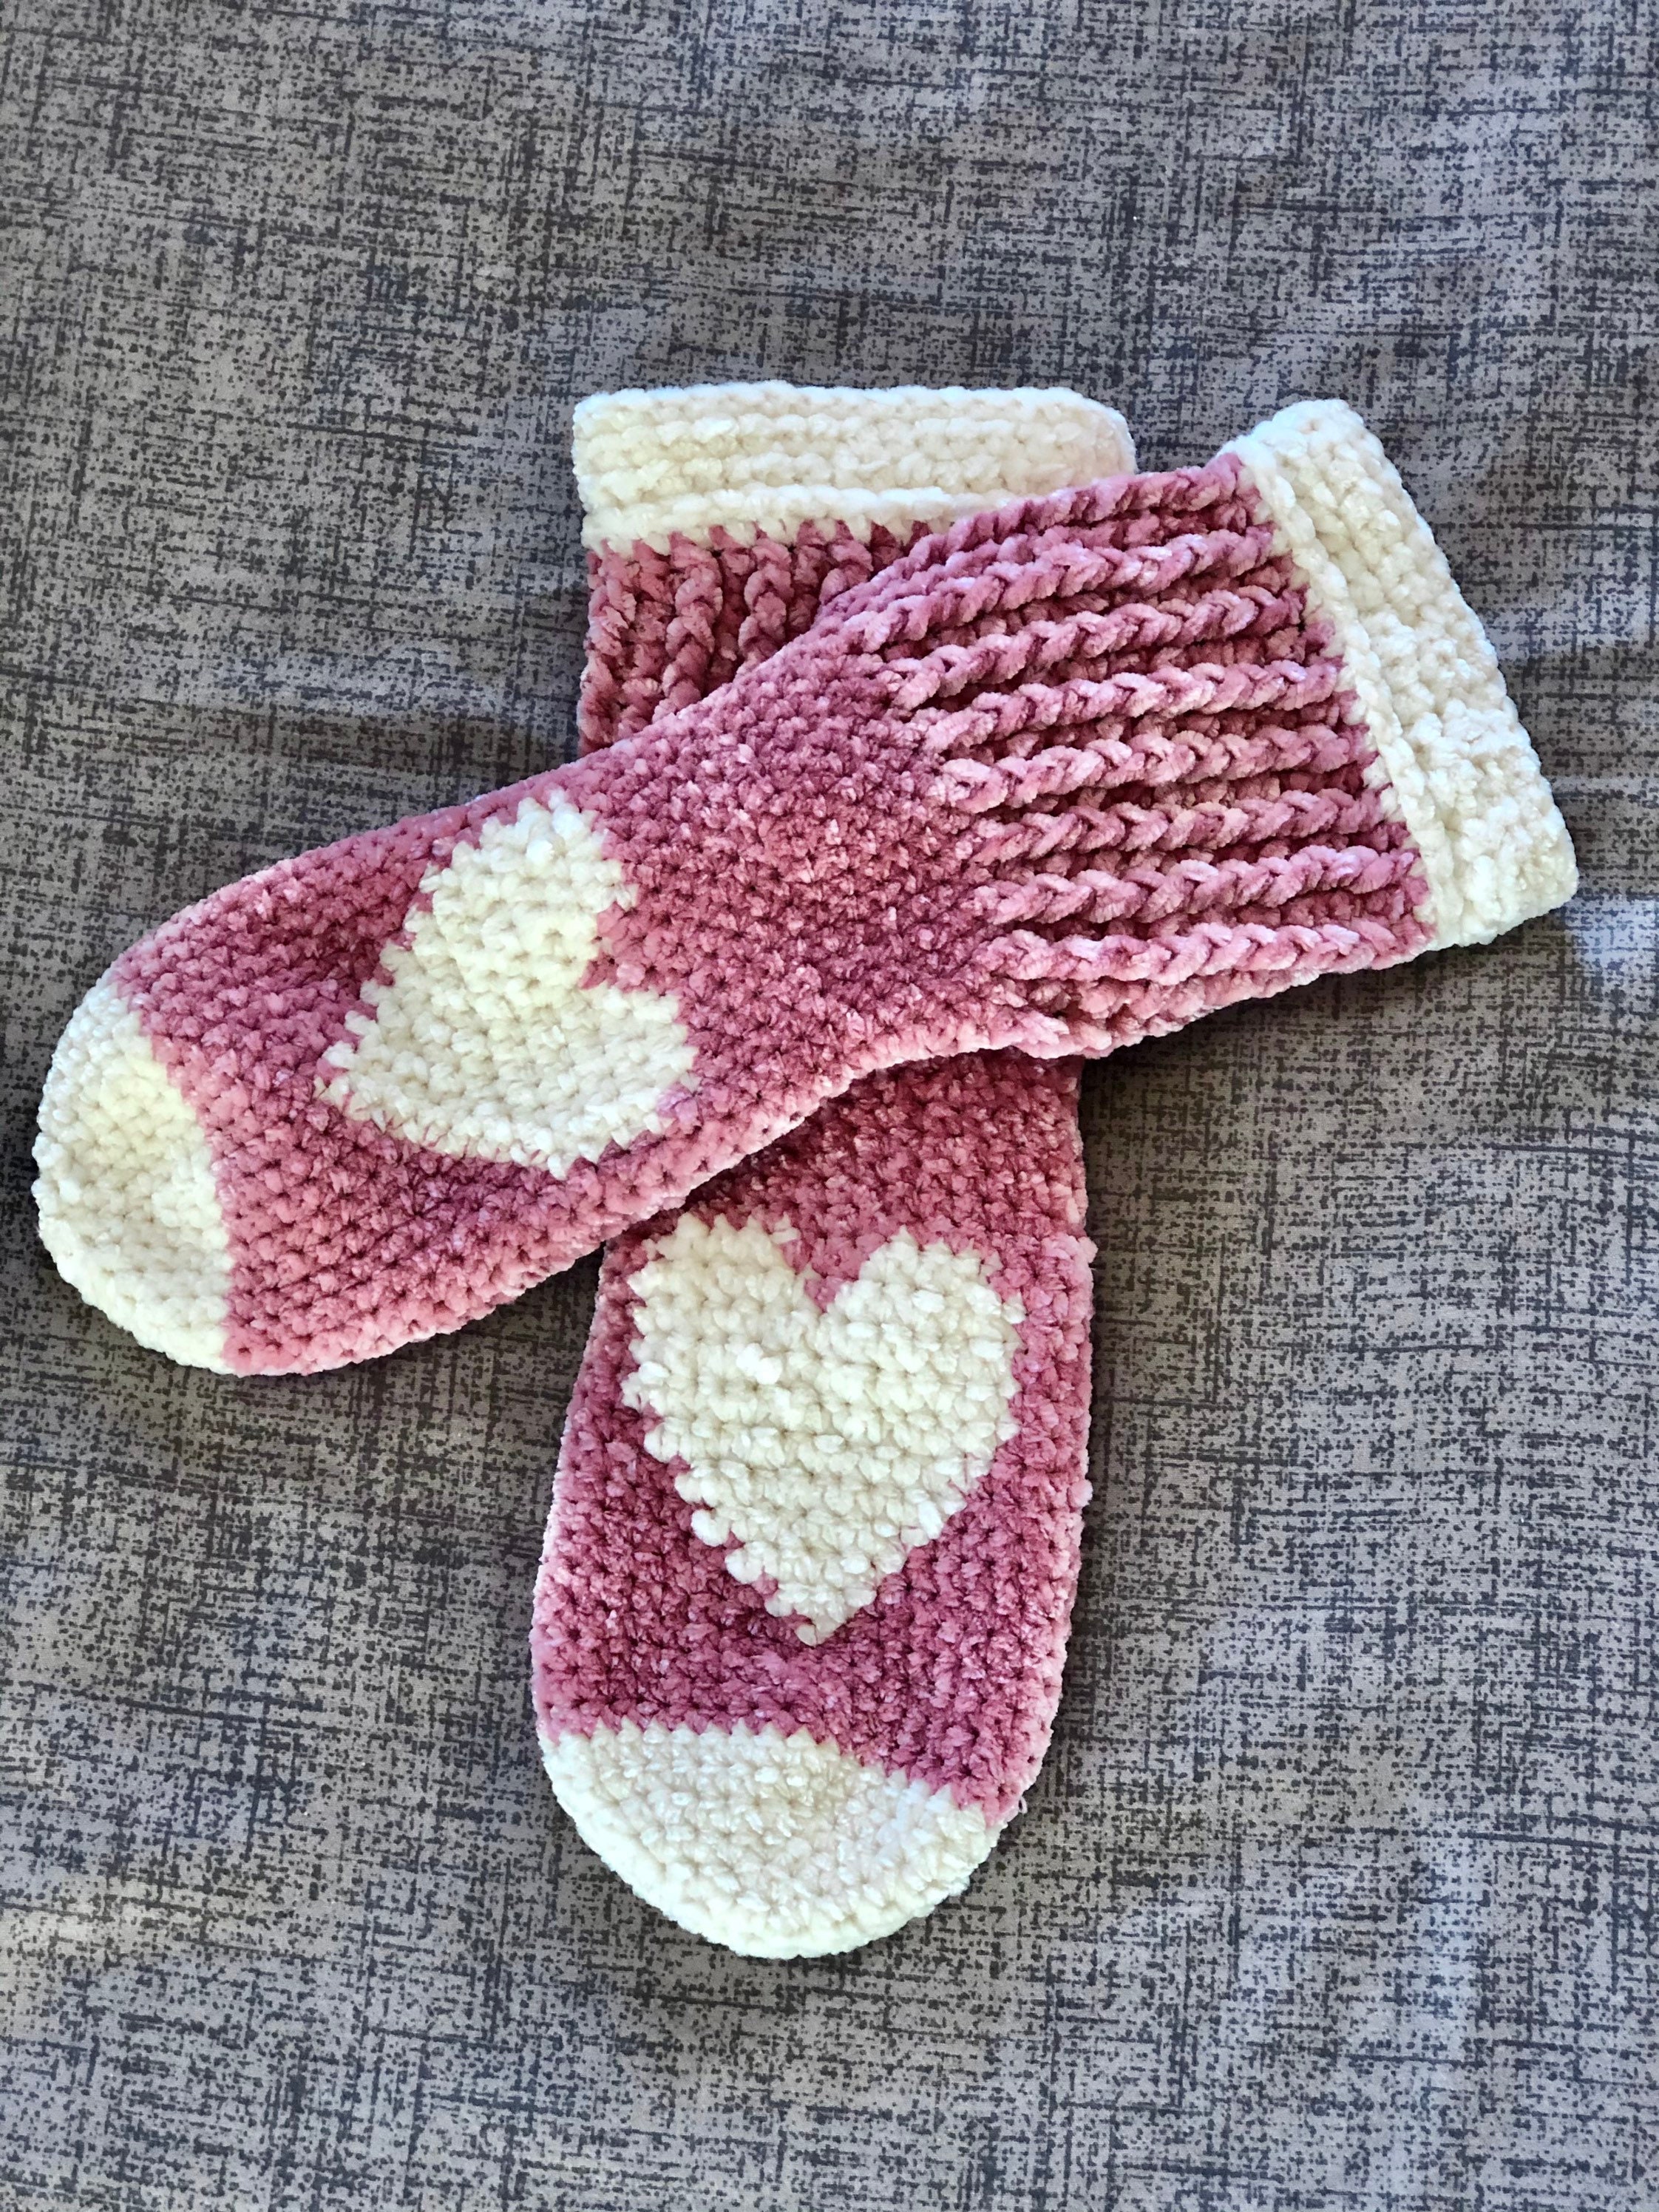 Wooden Sock Blockers (Pair) Hearts - Knitting Accessories, Gift for Knitter, Wooden Sock Form, Knitted Socks